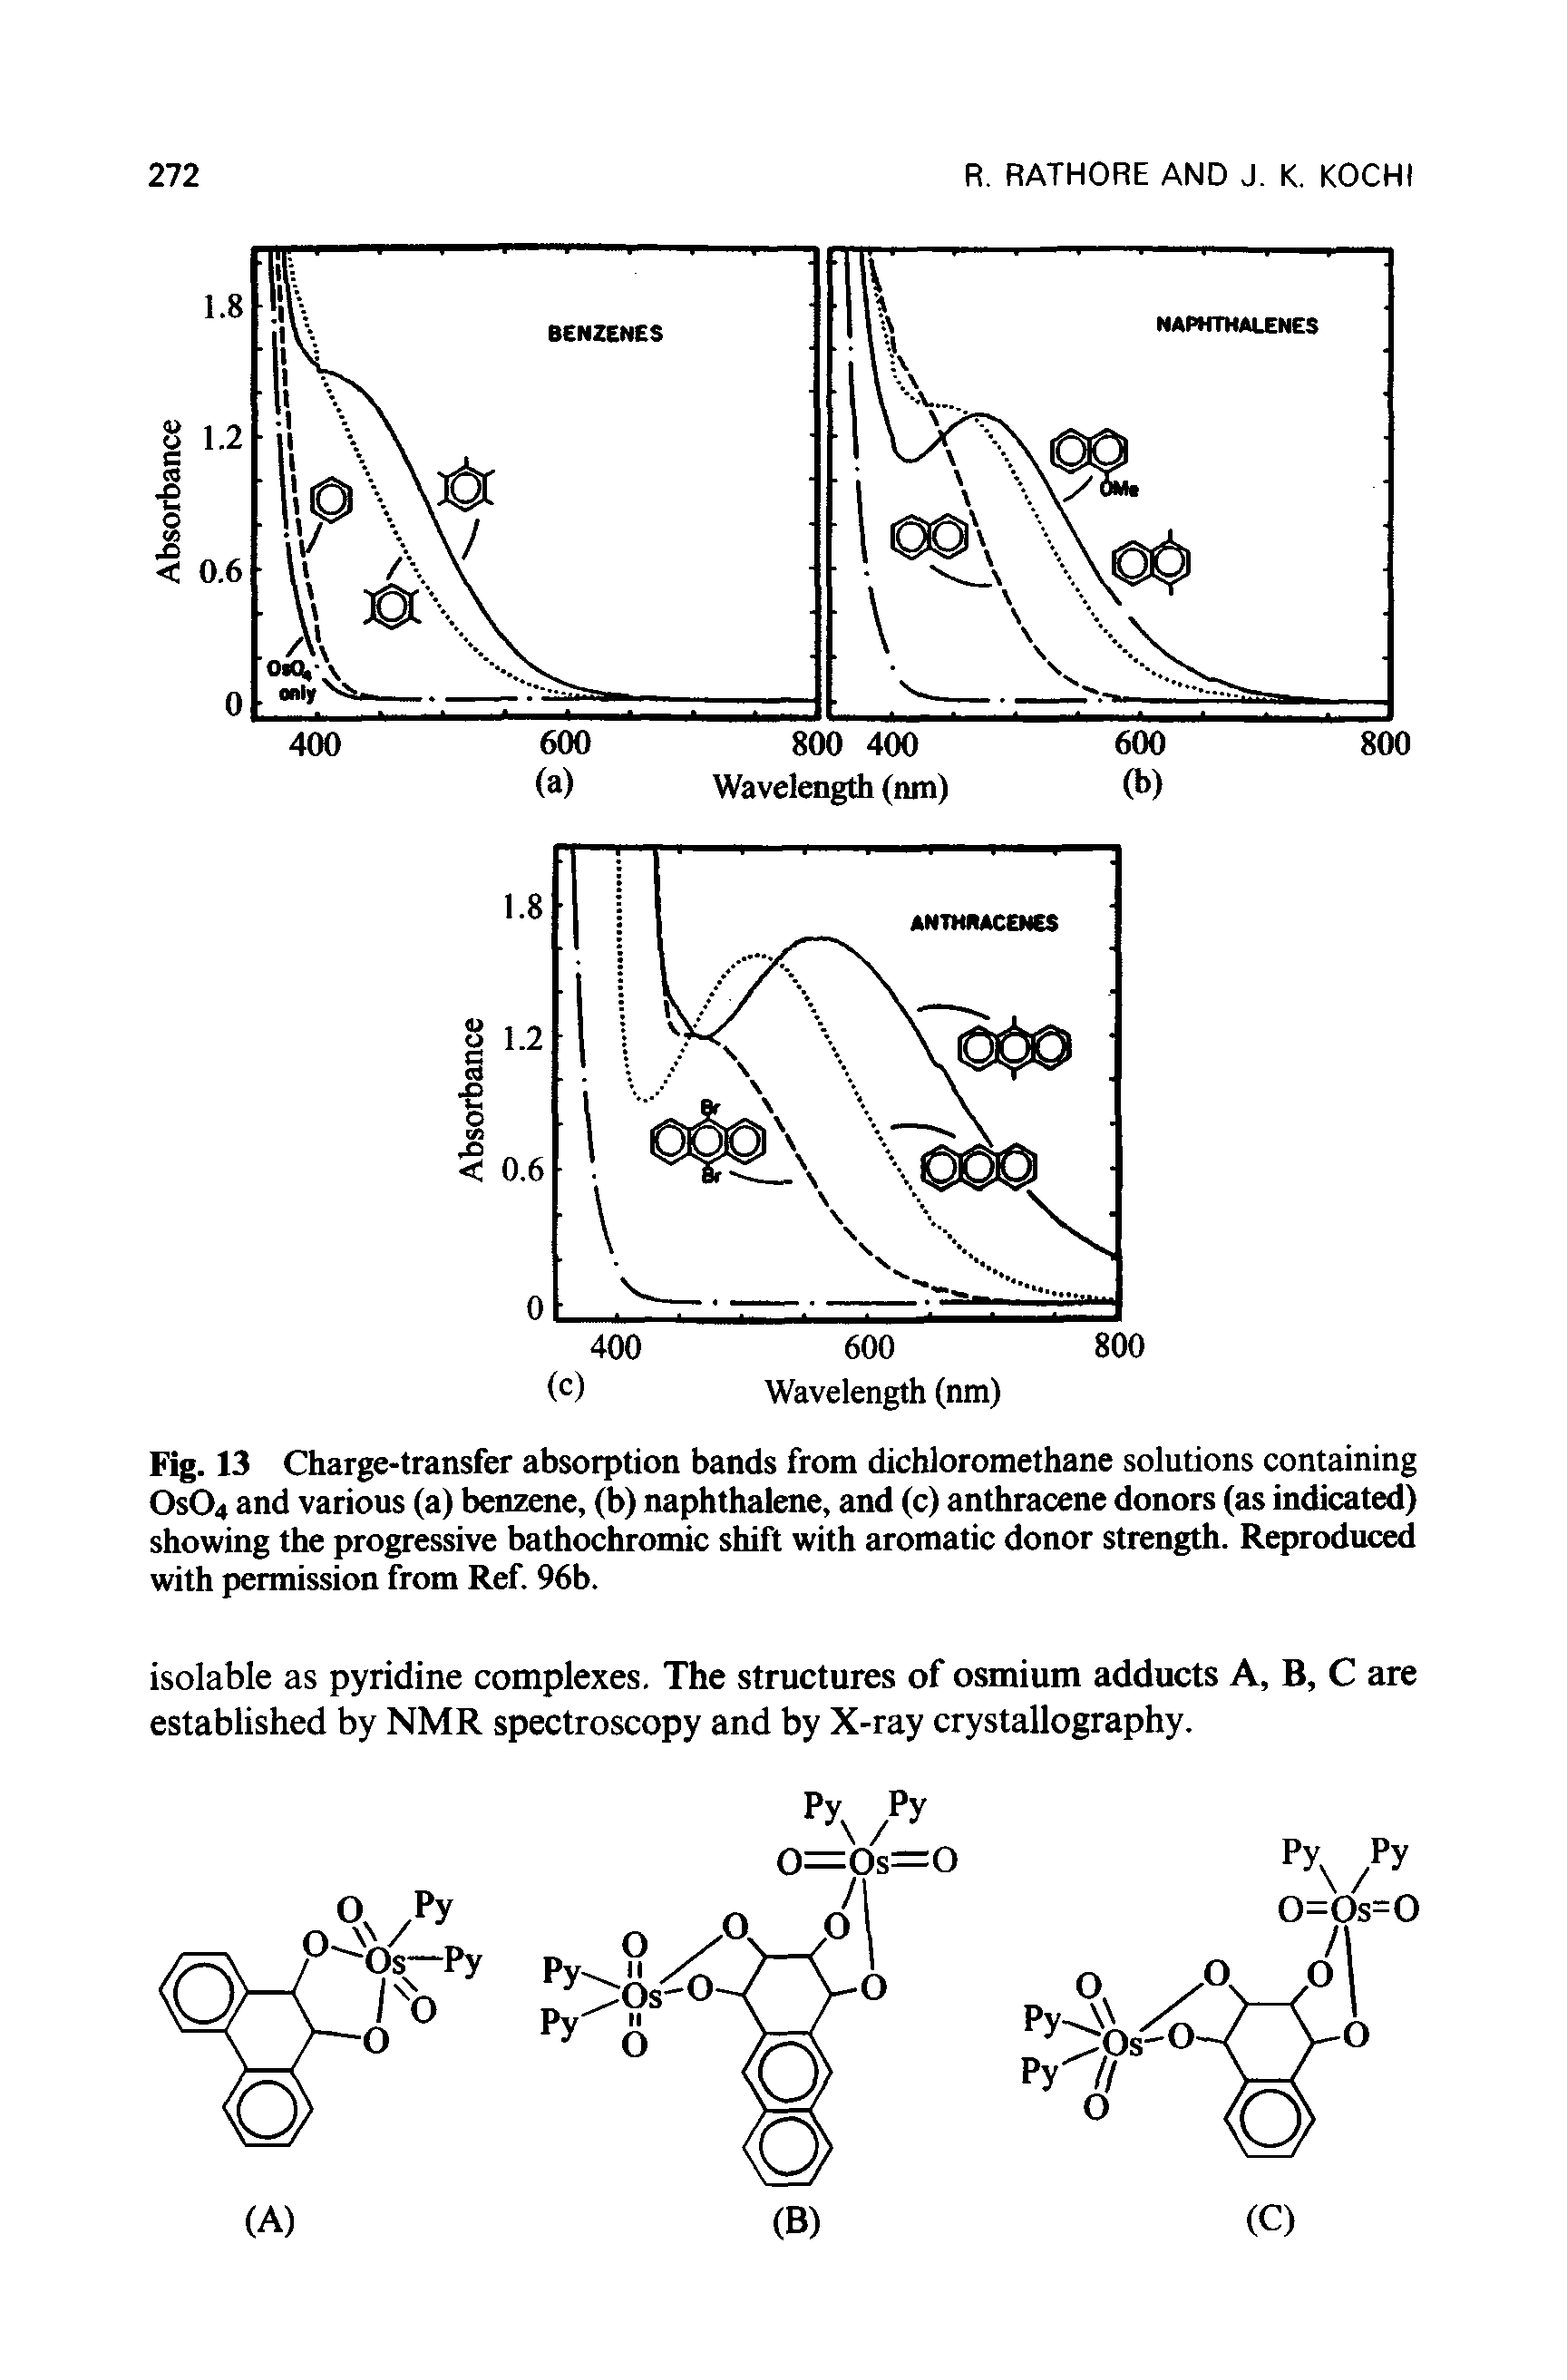 Fig. 13 Charge-transfer absorption bands from dichloromethane solutions containing Os04 and various (a) benzene, (b) naphthalene, and (c) anthracene donors (as indicated) showing the progressive bathochromic shift with aromatic donor strength. Reproduced with permission from Ref. 96b.